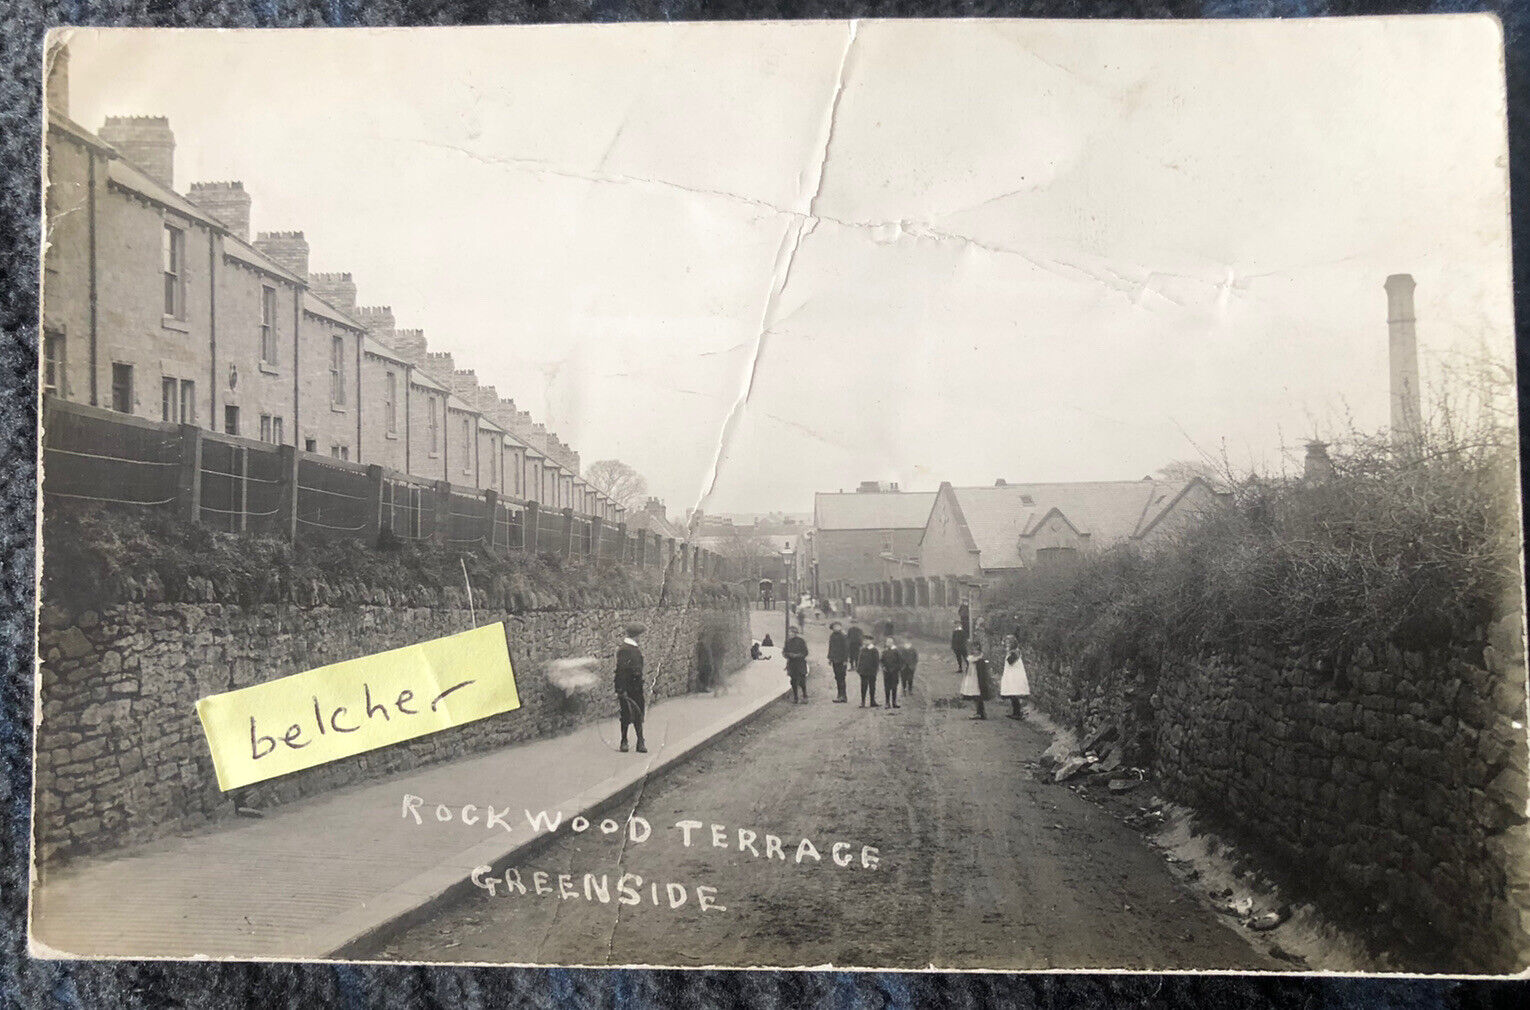 House Clearance - c1910 Greenside Rockwood Terrace Children Playing In Street Durham RP Service